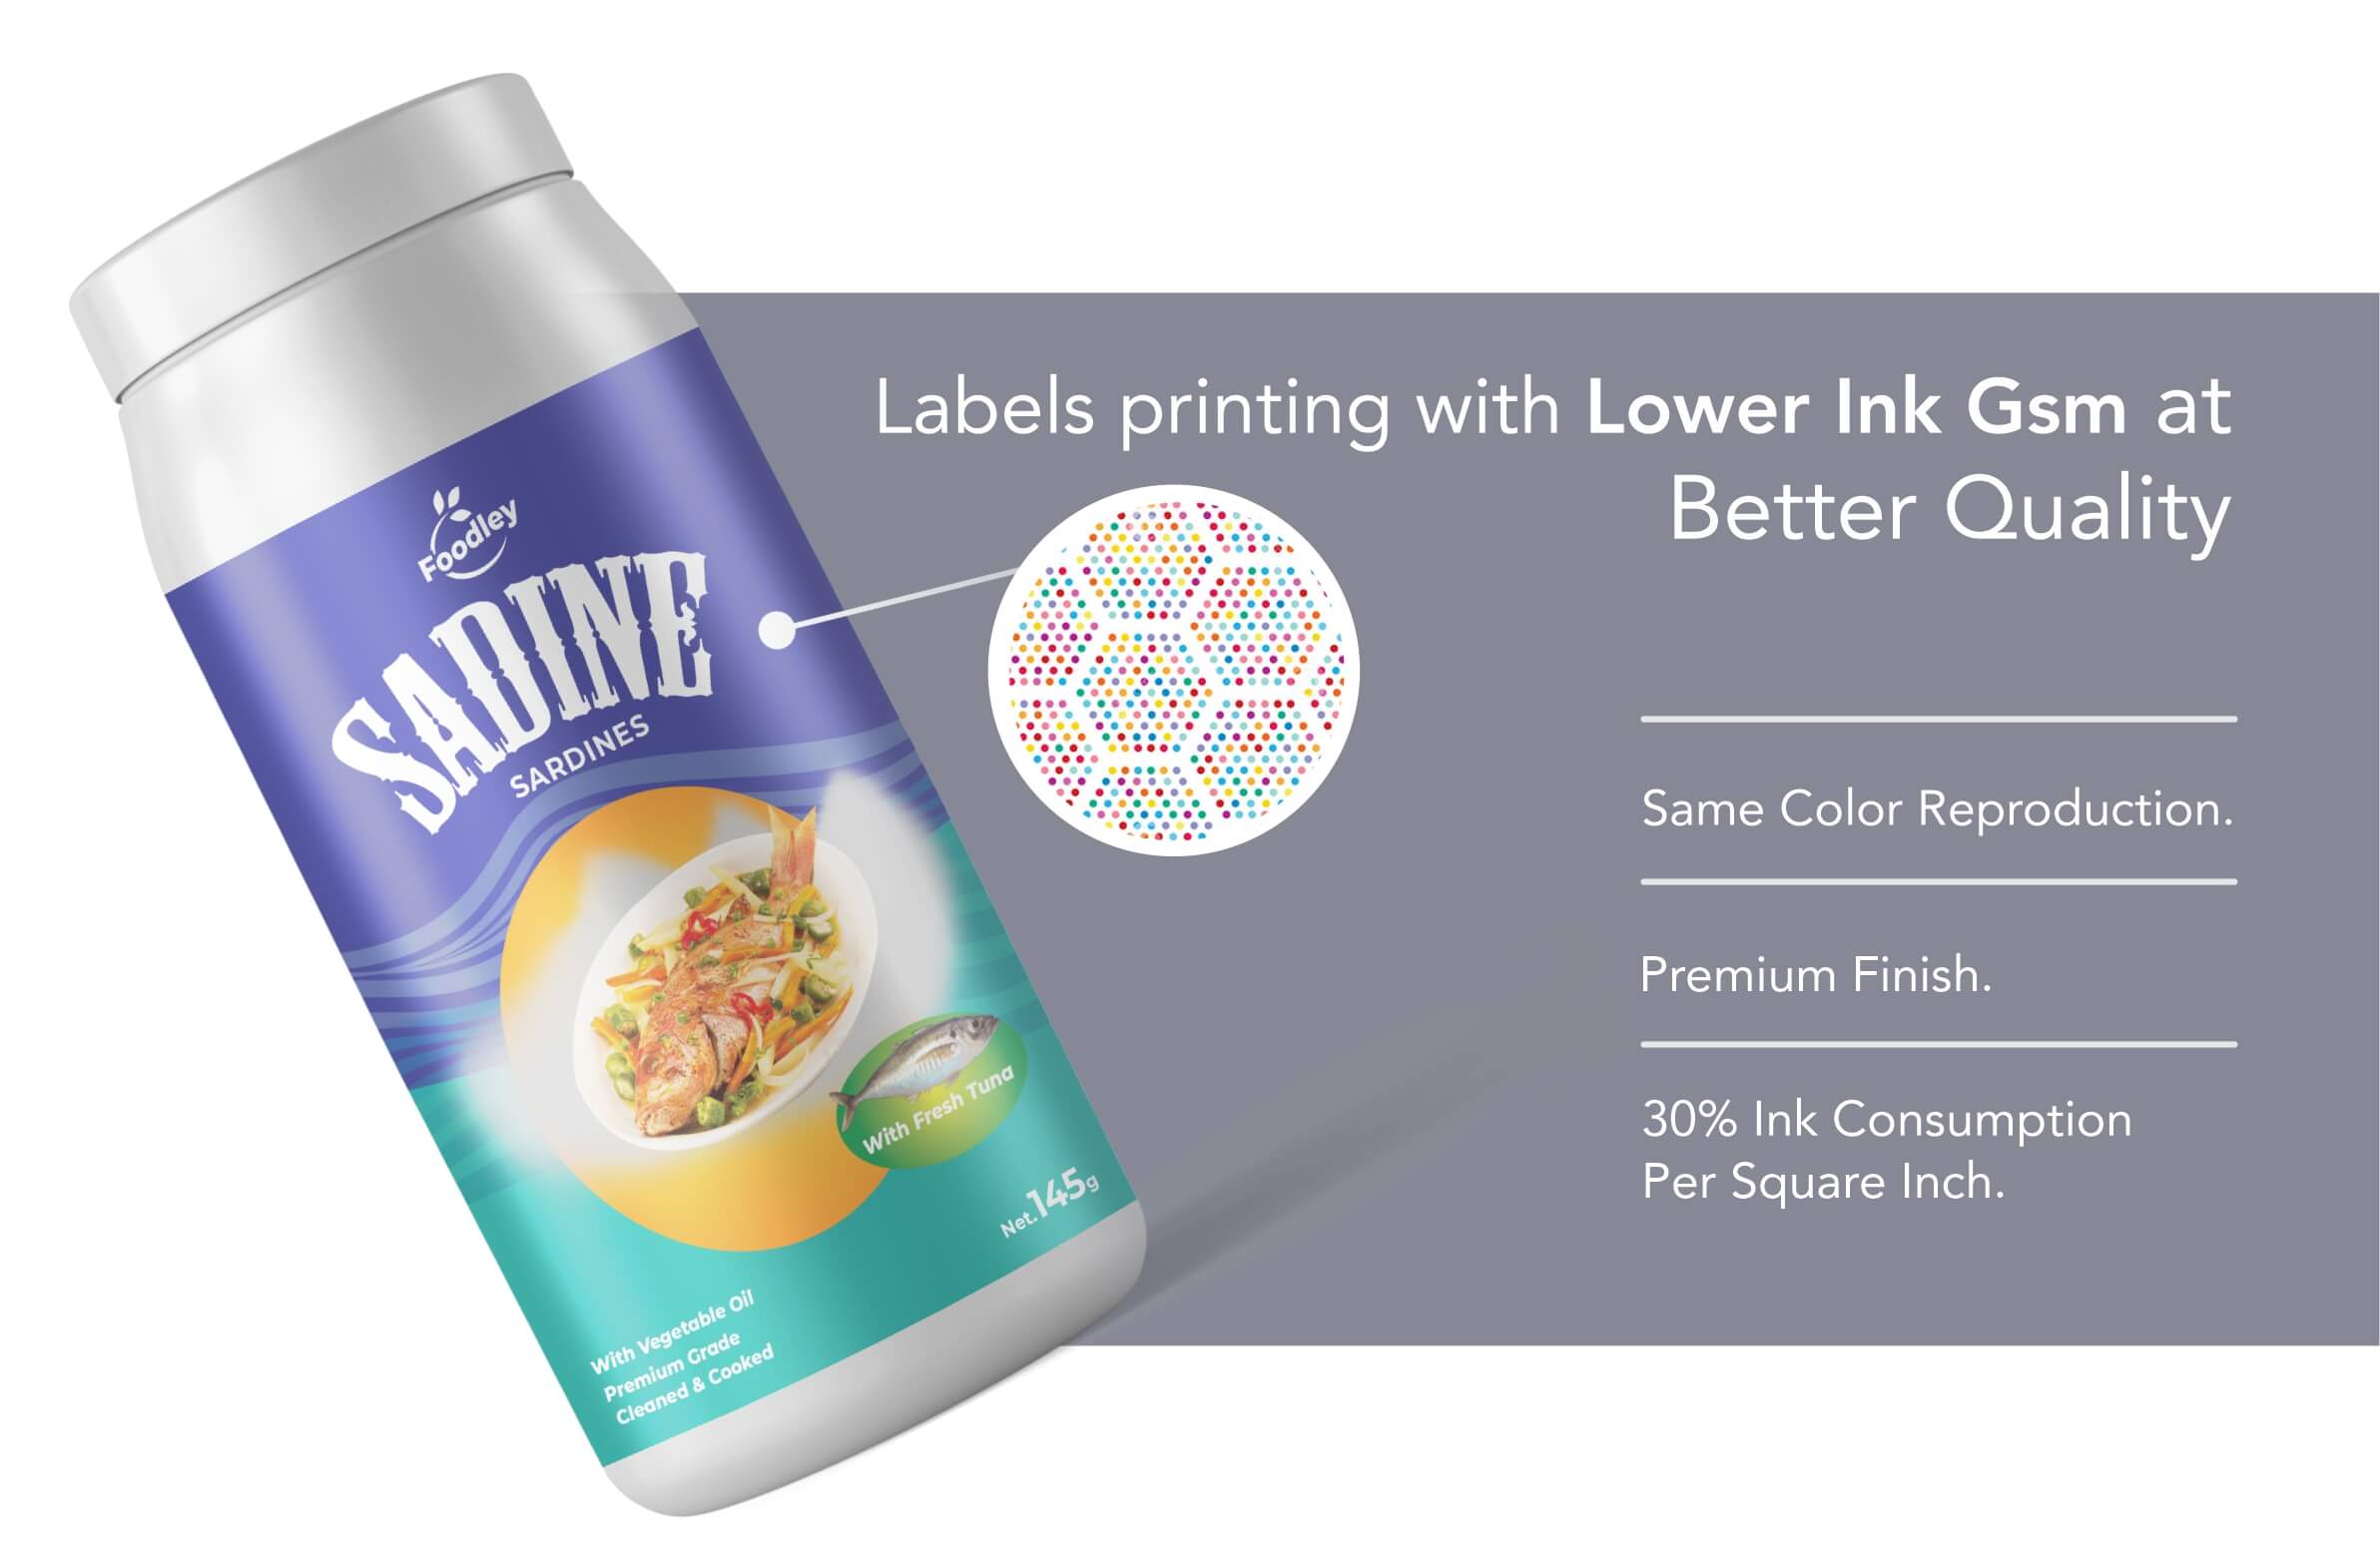 Printing with Lower Ink Gsm